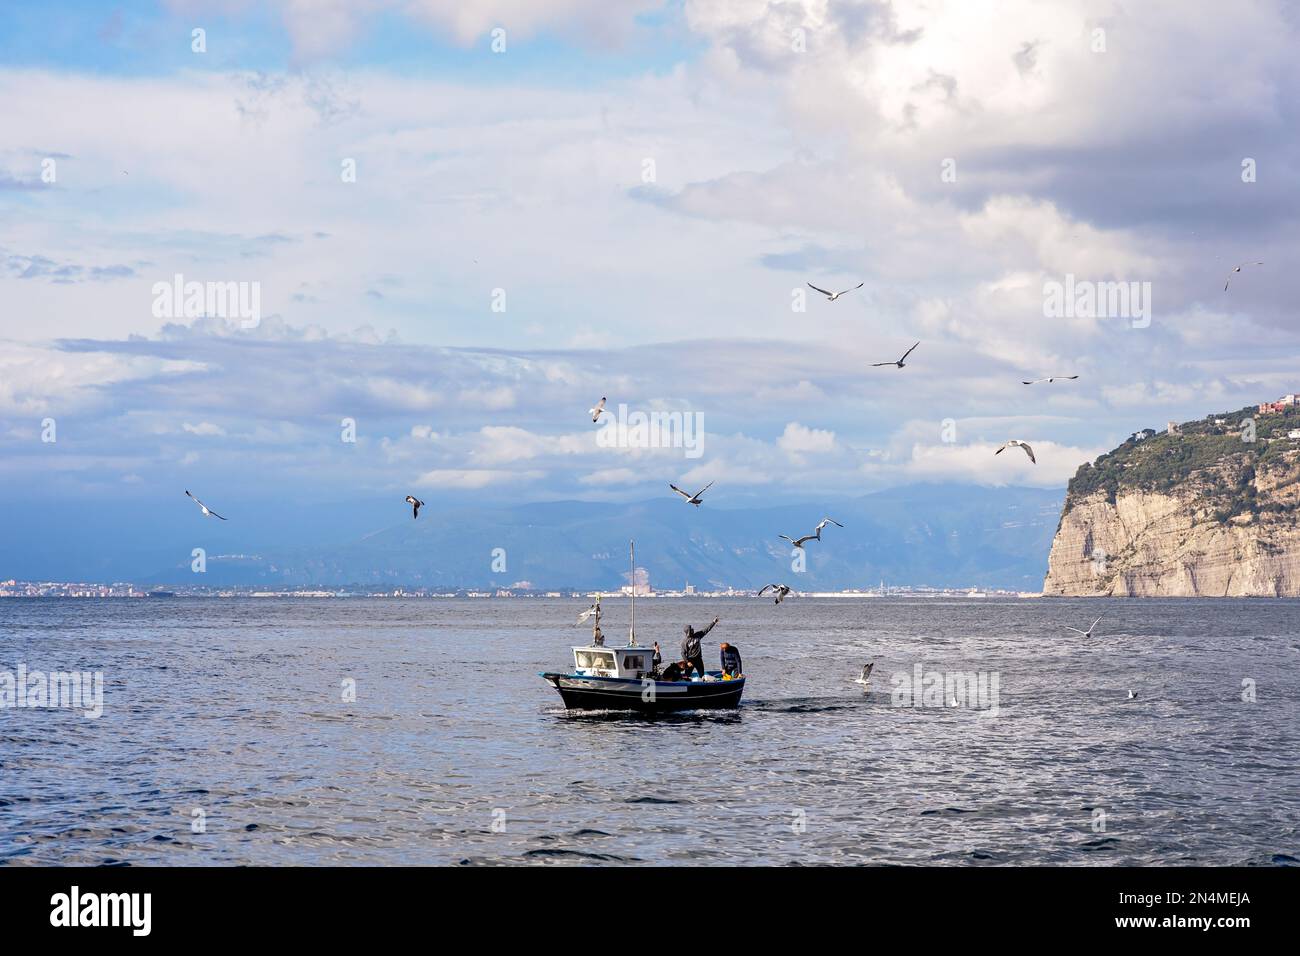 Sorrento, Italy - Fisherman on his boat getting fresh seafood in Naples Bay. Food is then cooked and served in a local restaurant in Sorrento, Marina . Stock Photo